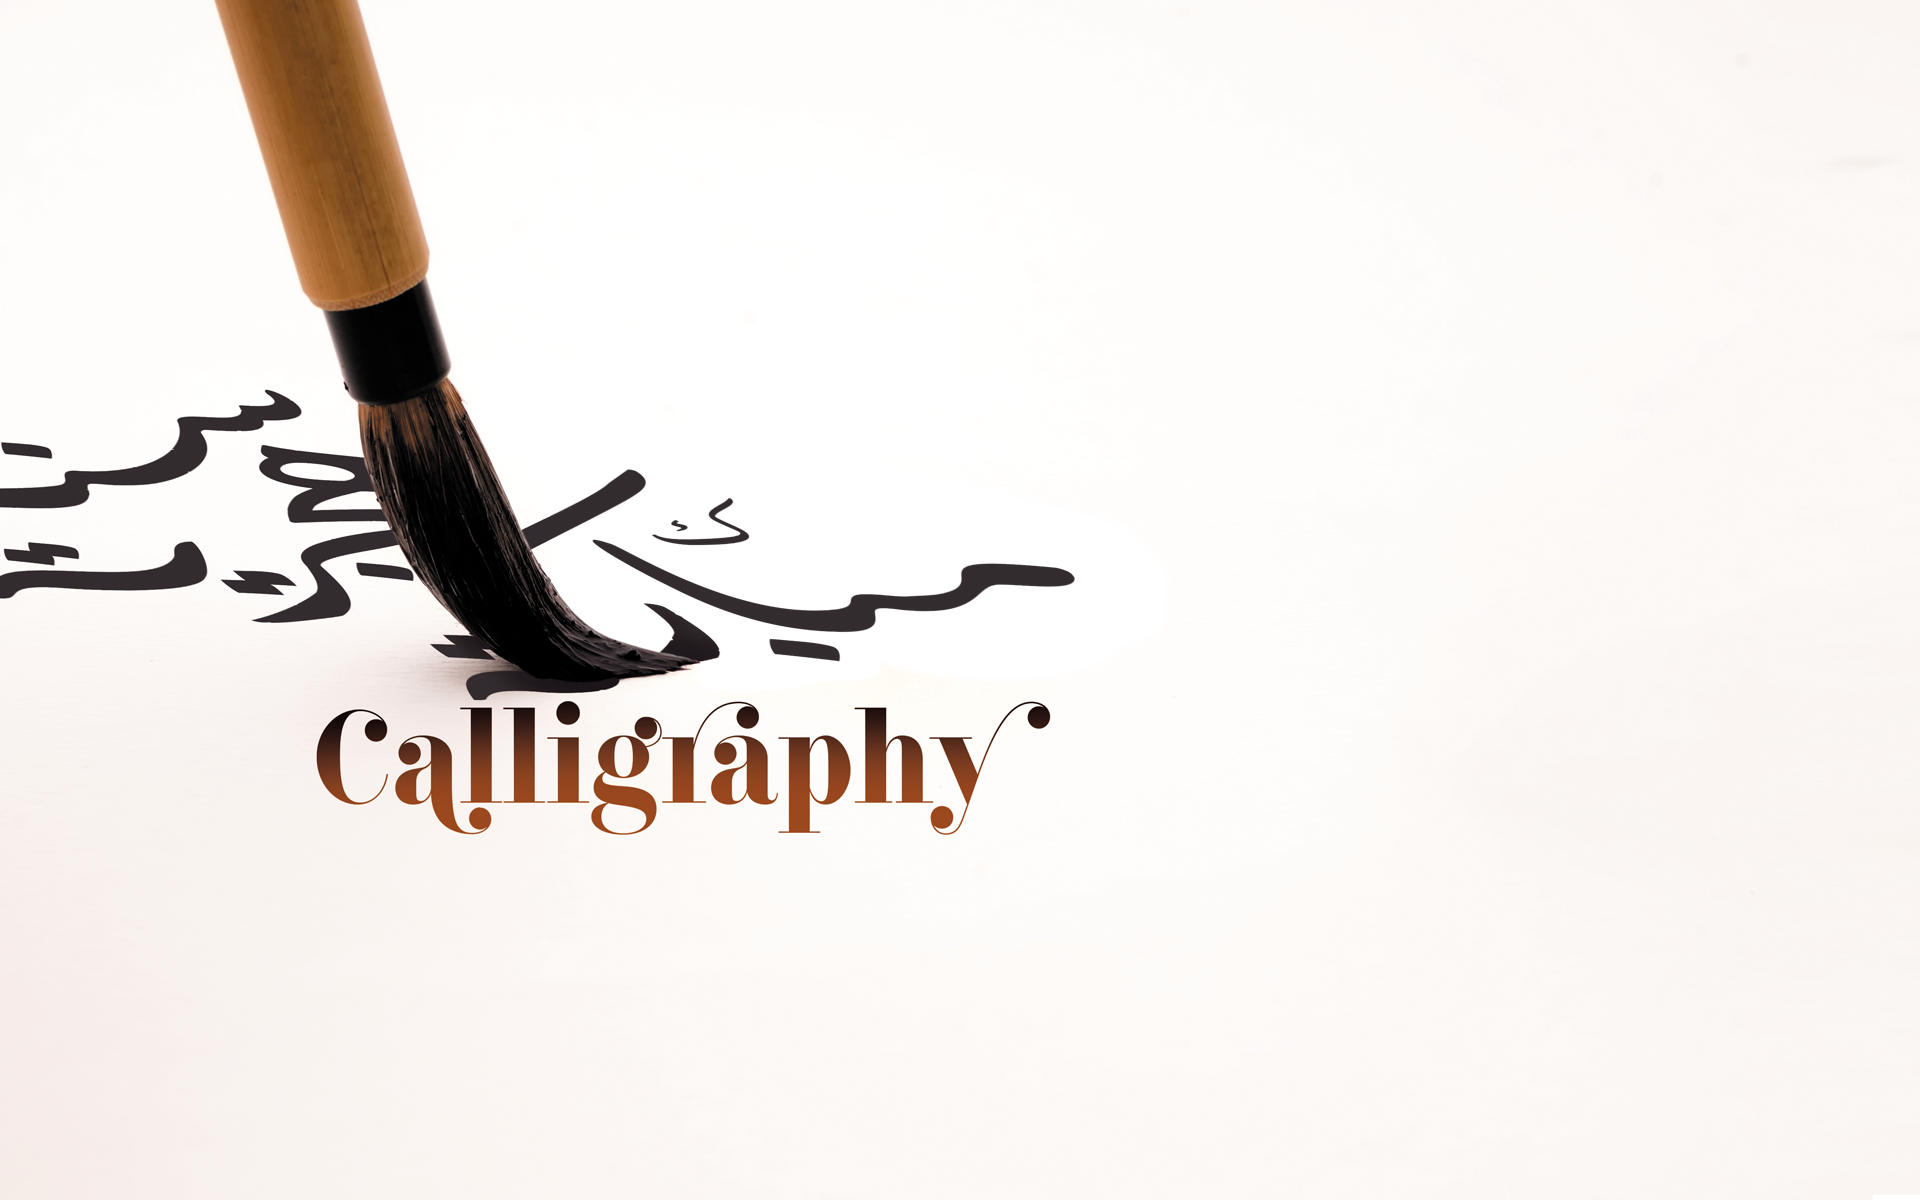 Calligraphy: An Ancient Art of Writing